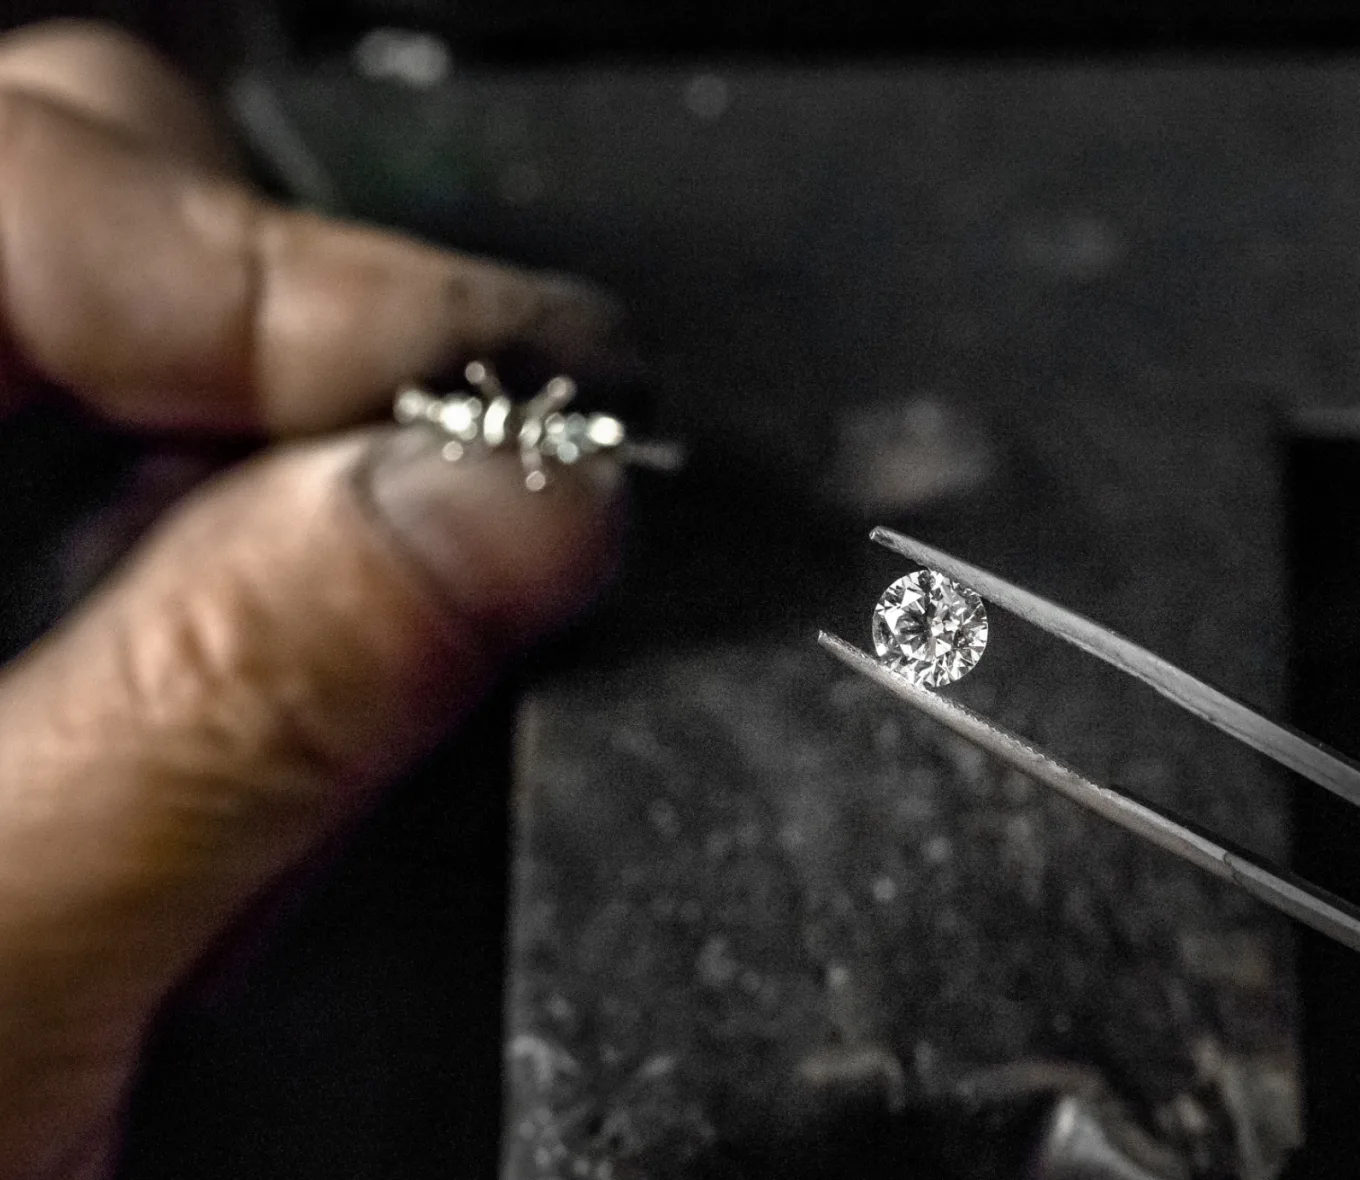 jeweler setting a diamond center stone into a gold engagement ring